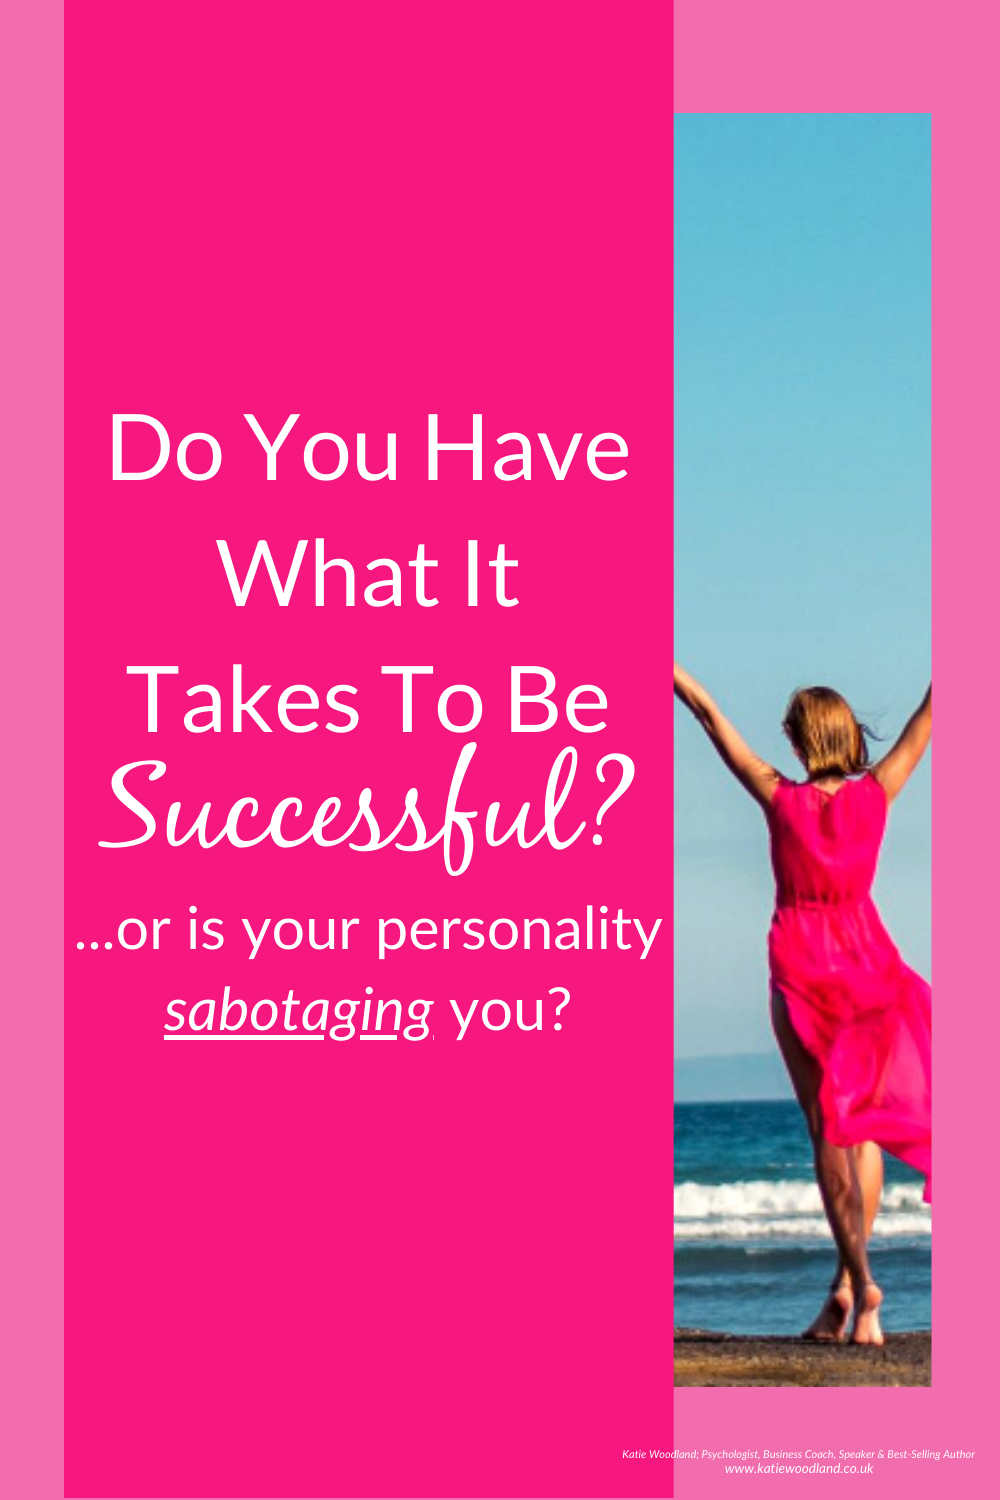 Do You Have What It Takes To Be Successful? Or Is Your Personality Sabotaging You...?